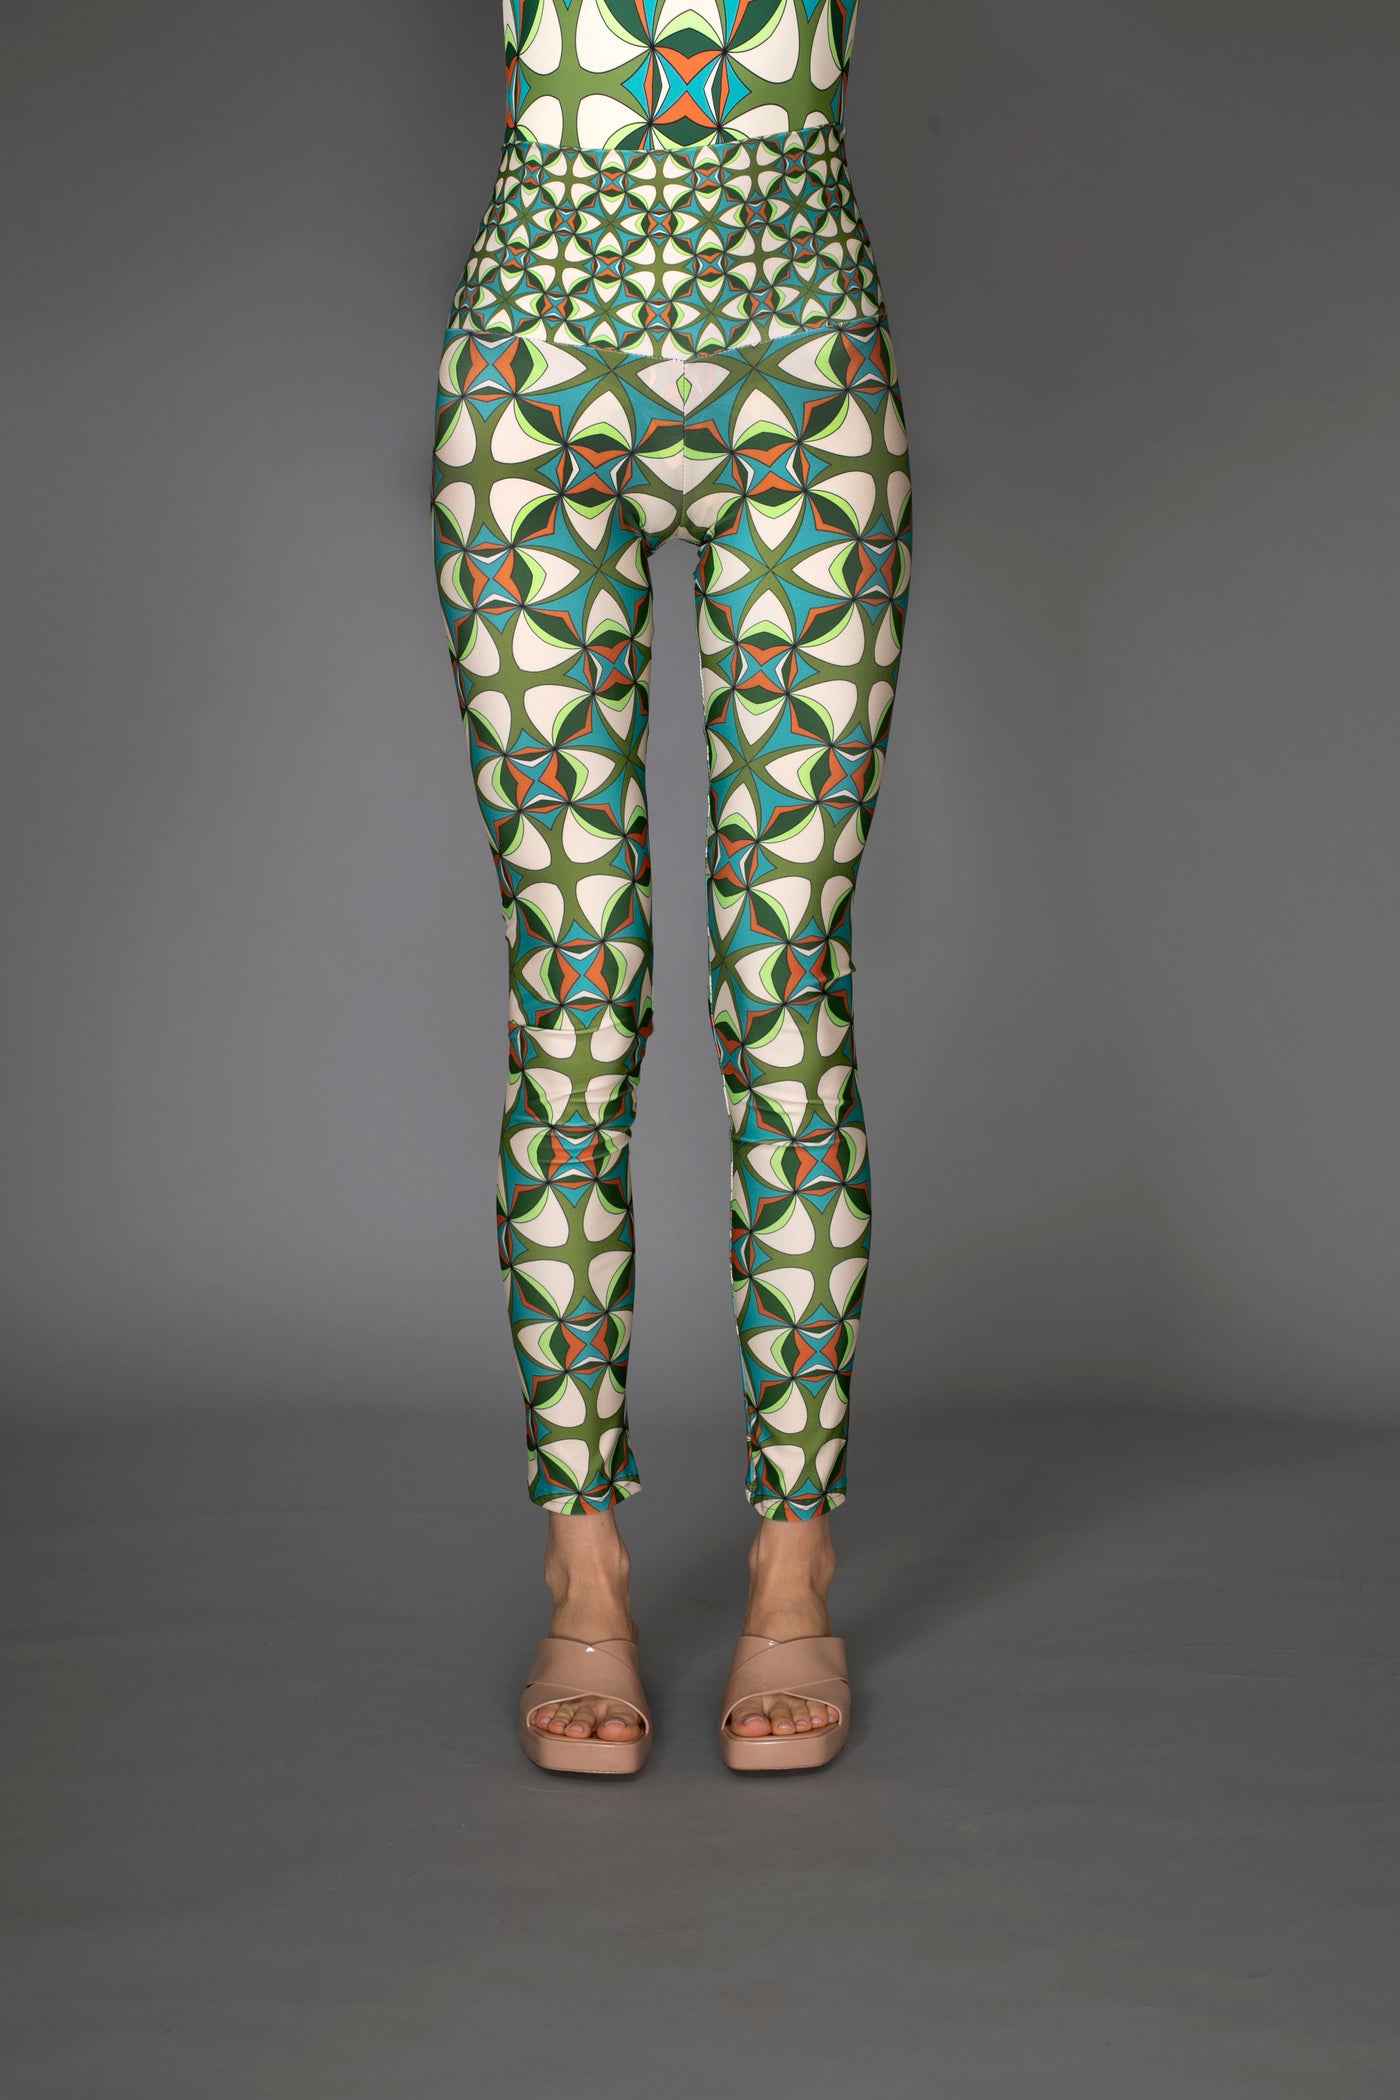 AB - Abstract Green Psychedelic Leggings